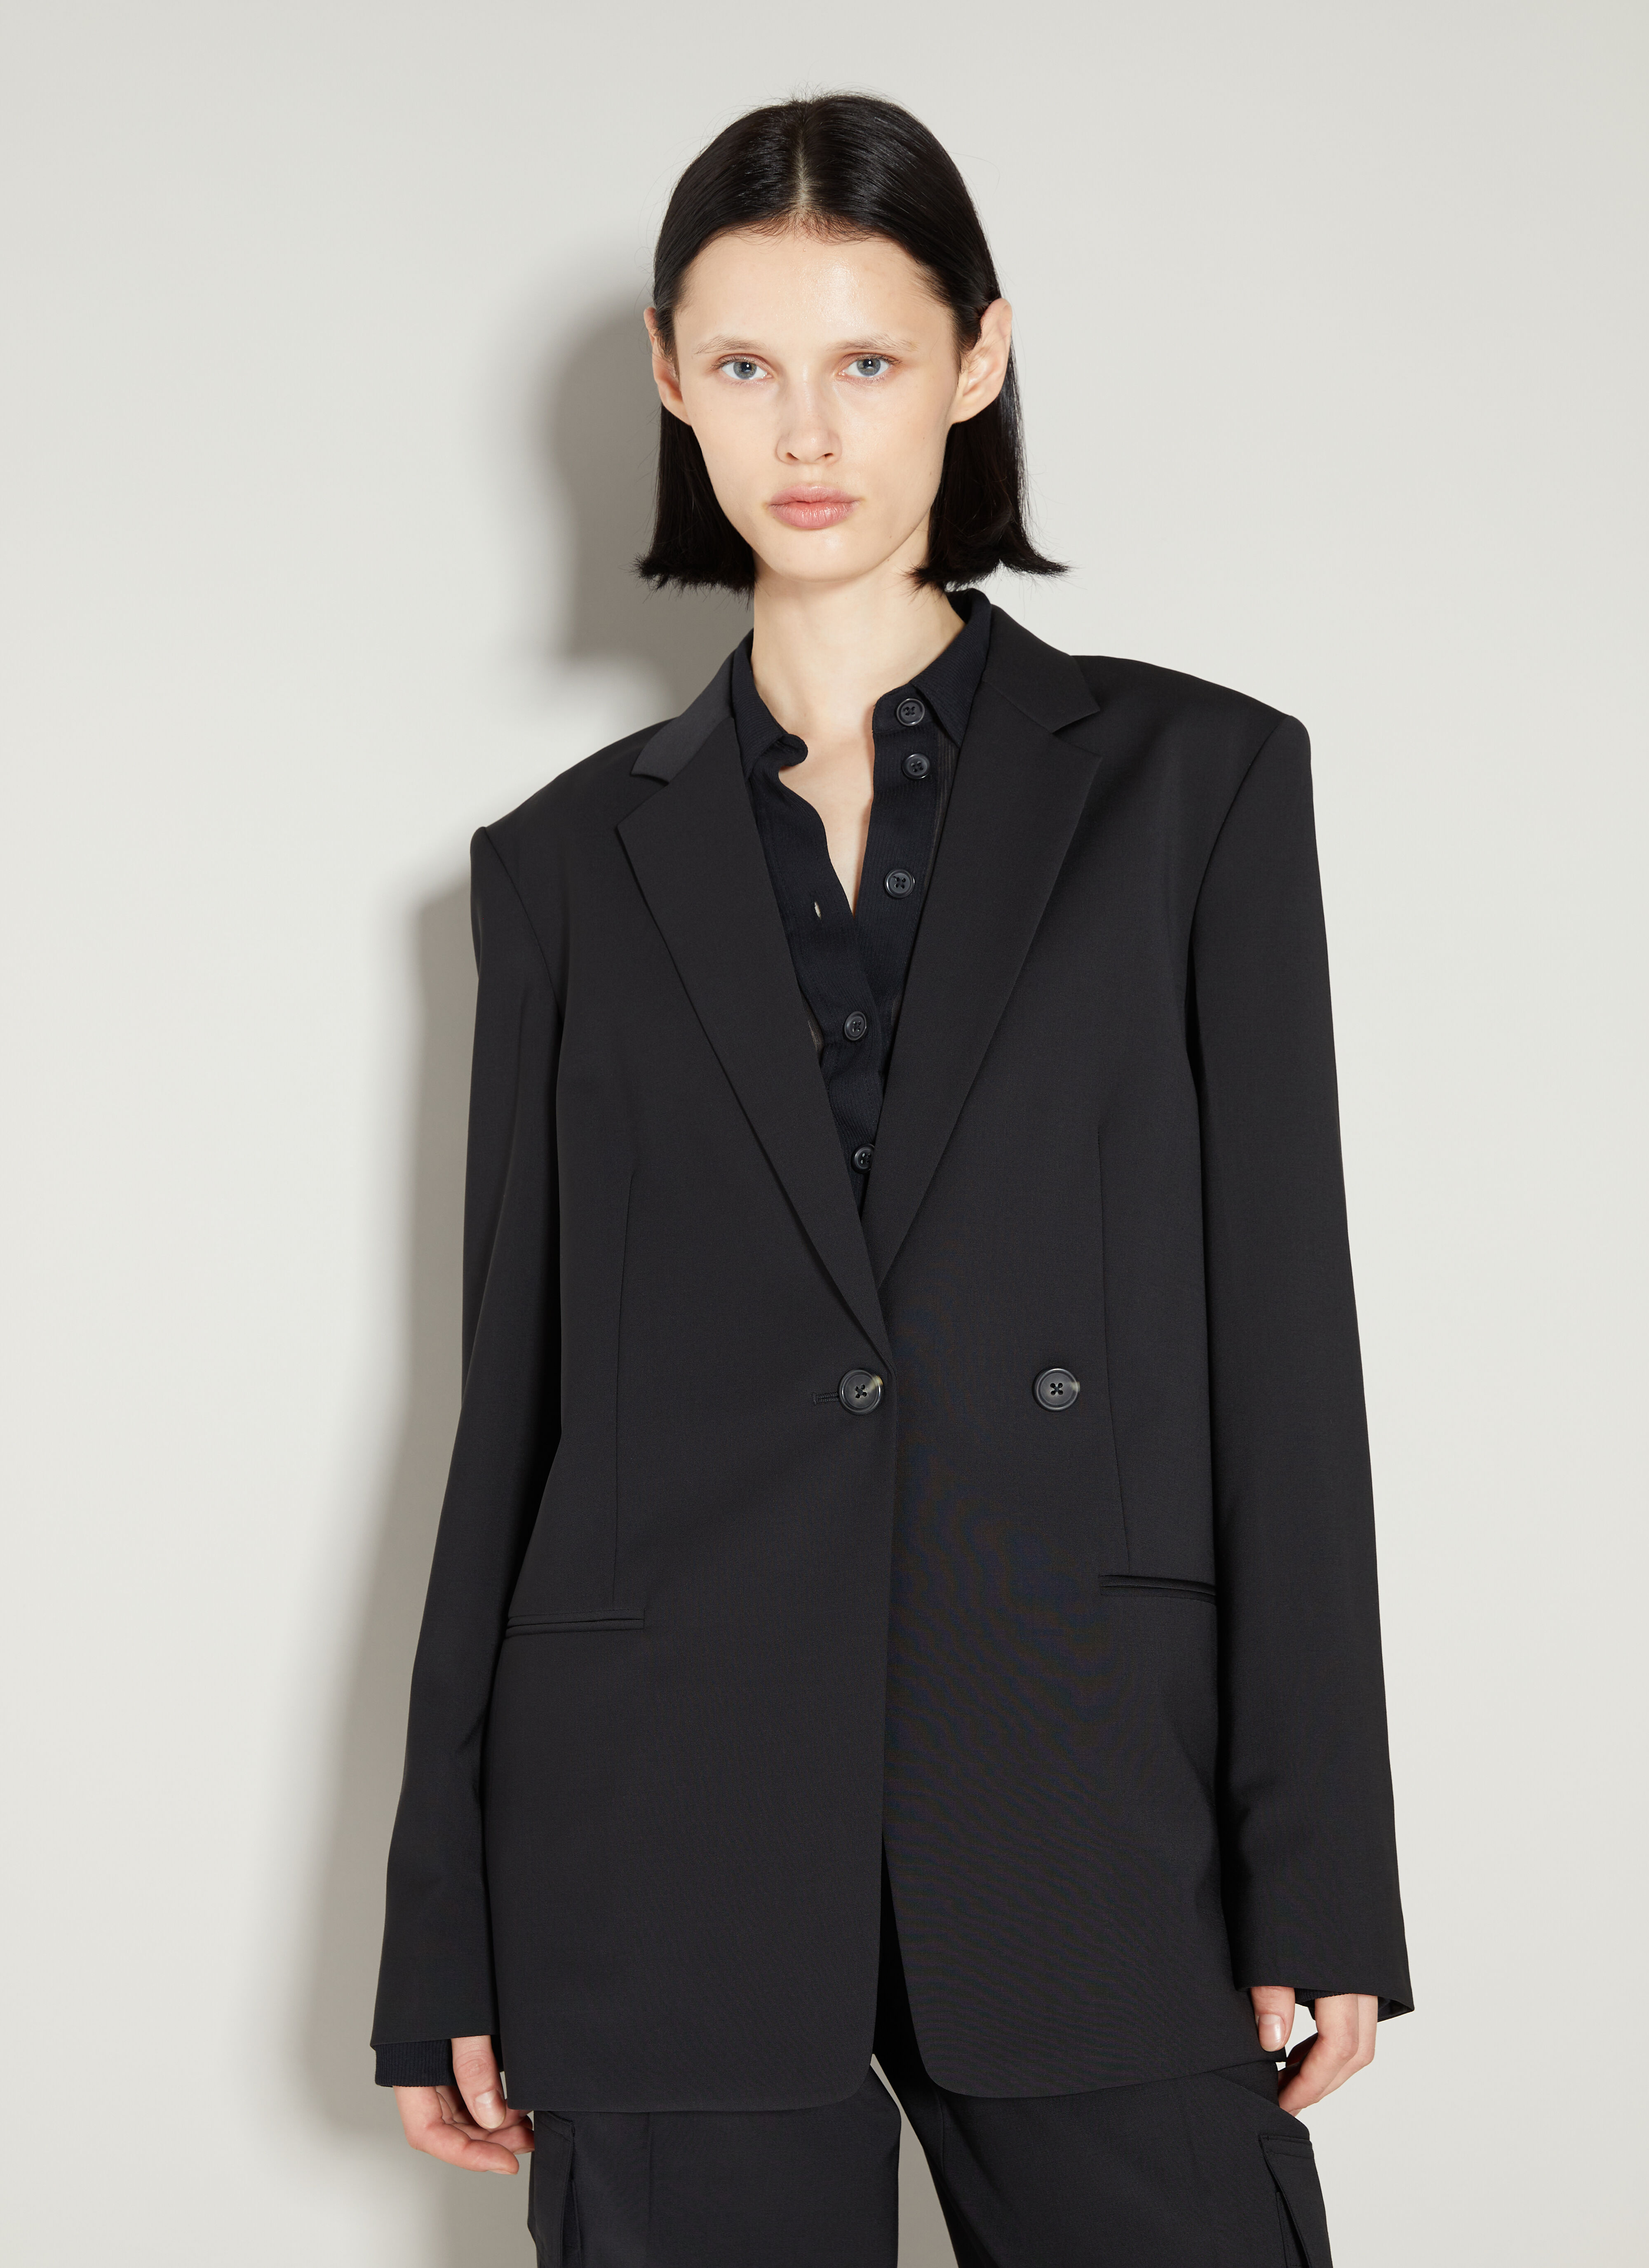 Helmut Lang Pants & Blazers for Women | Order now at LN-CC®